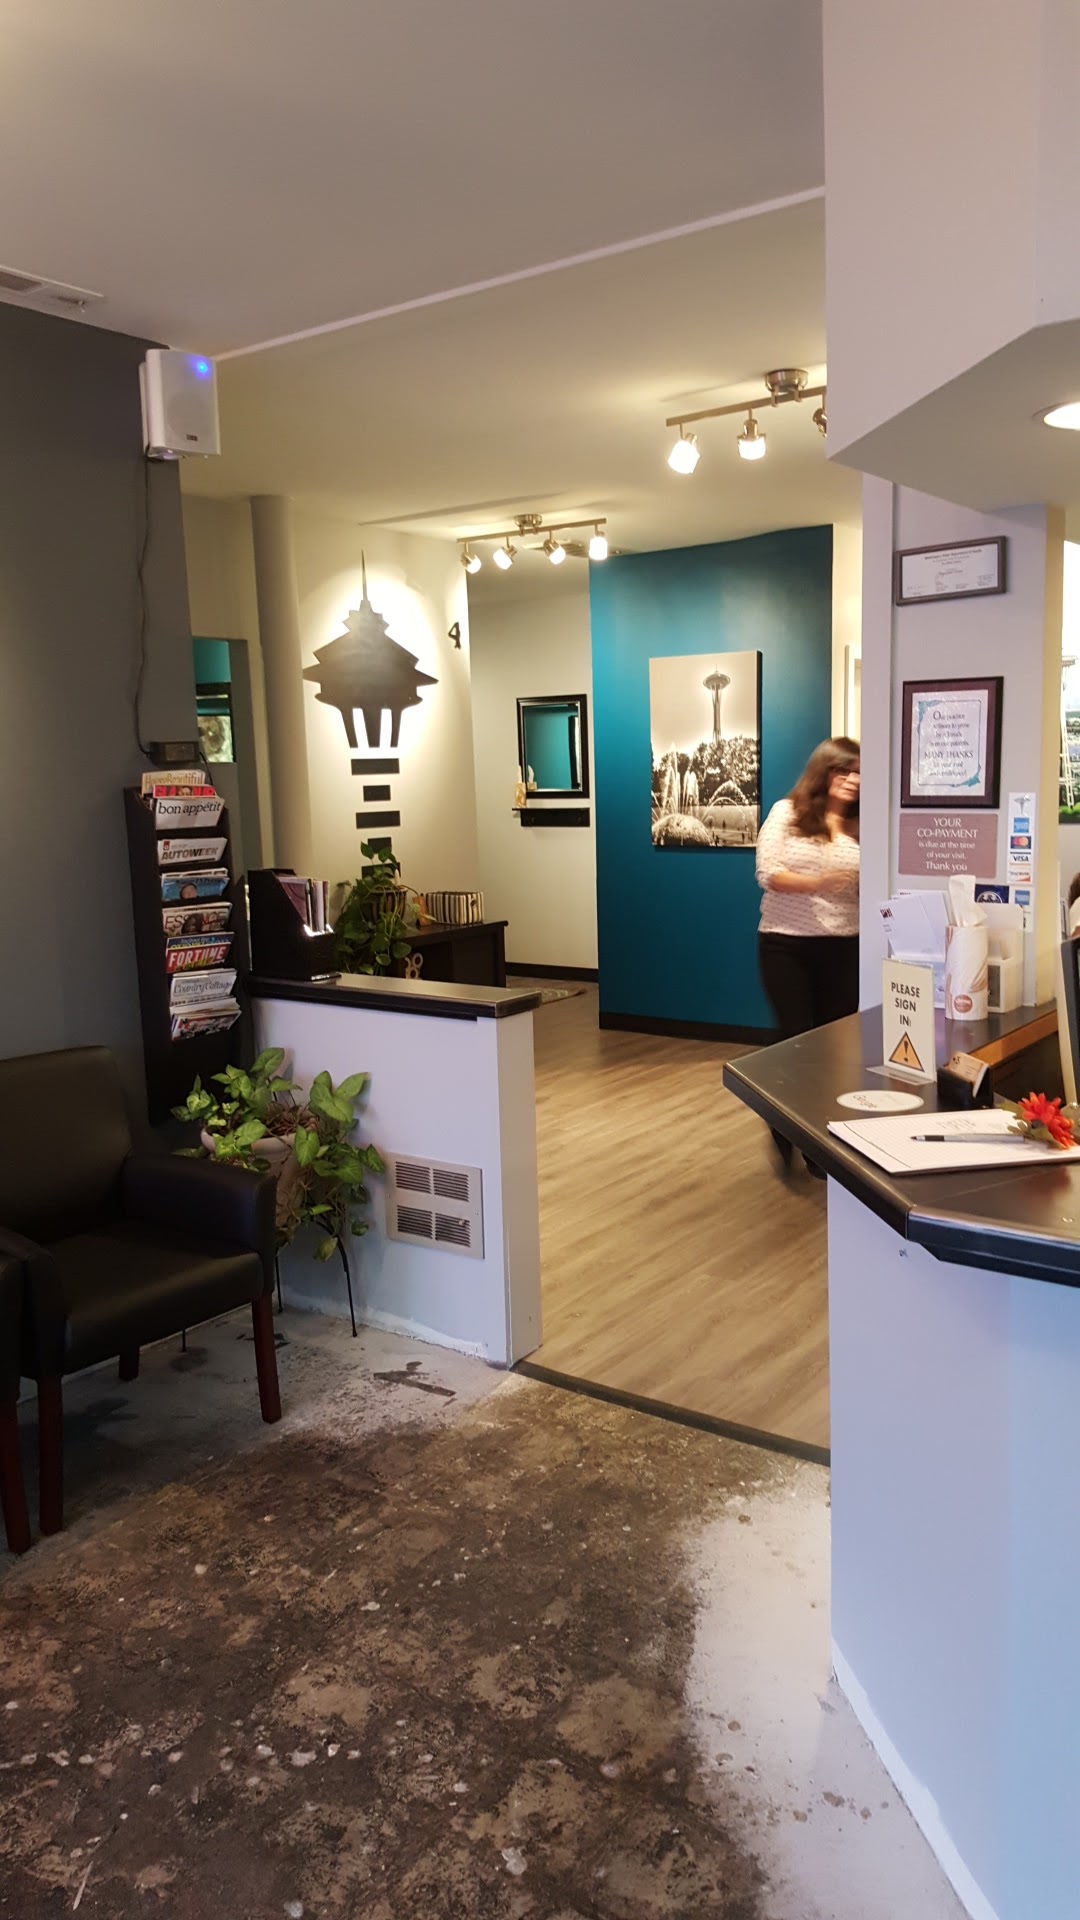 35th Avenue Chiropractic